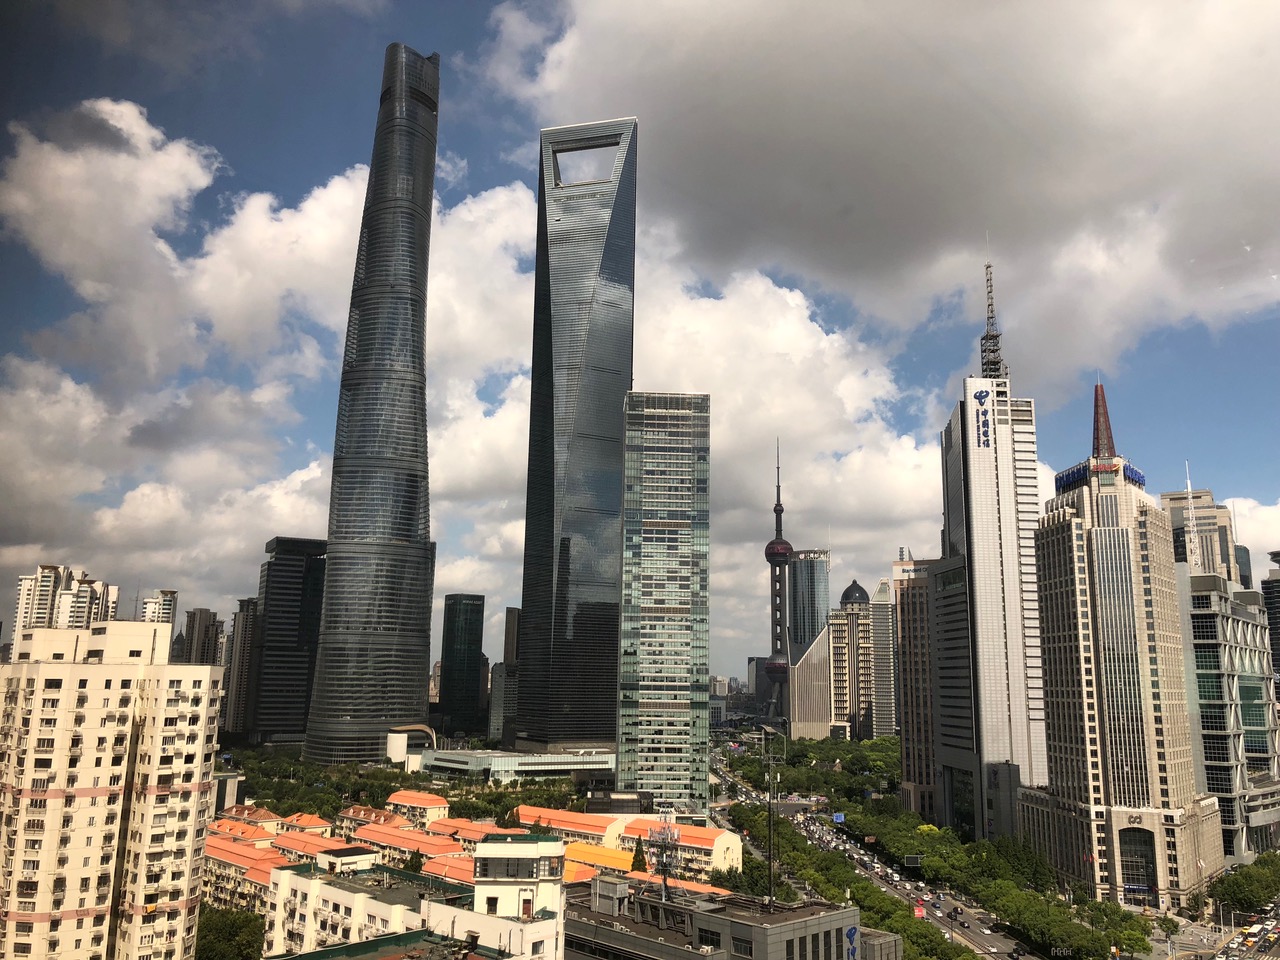 iRepChina office building, a tall, largely glass skyscraper in Shanghai, visible here on a blue sky day